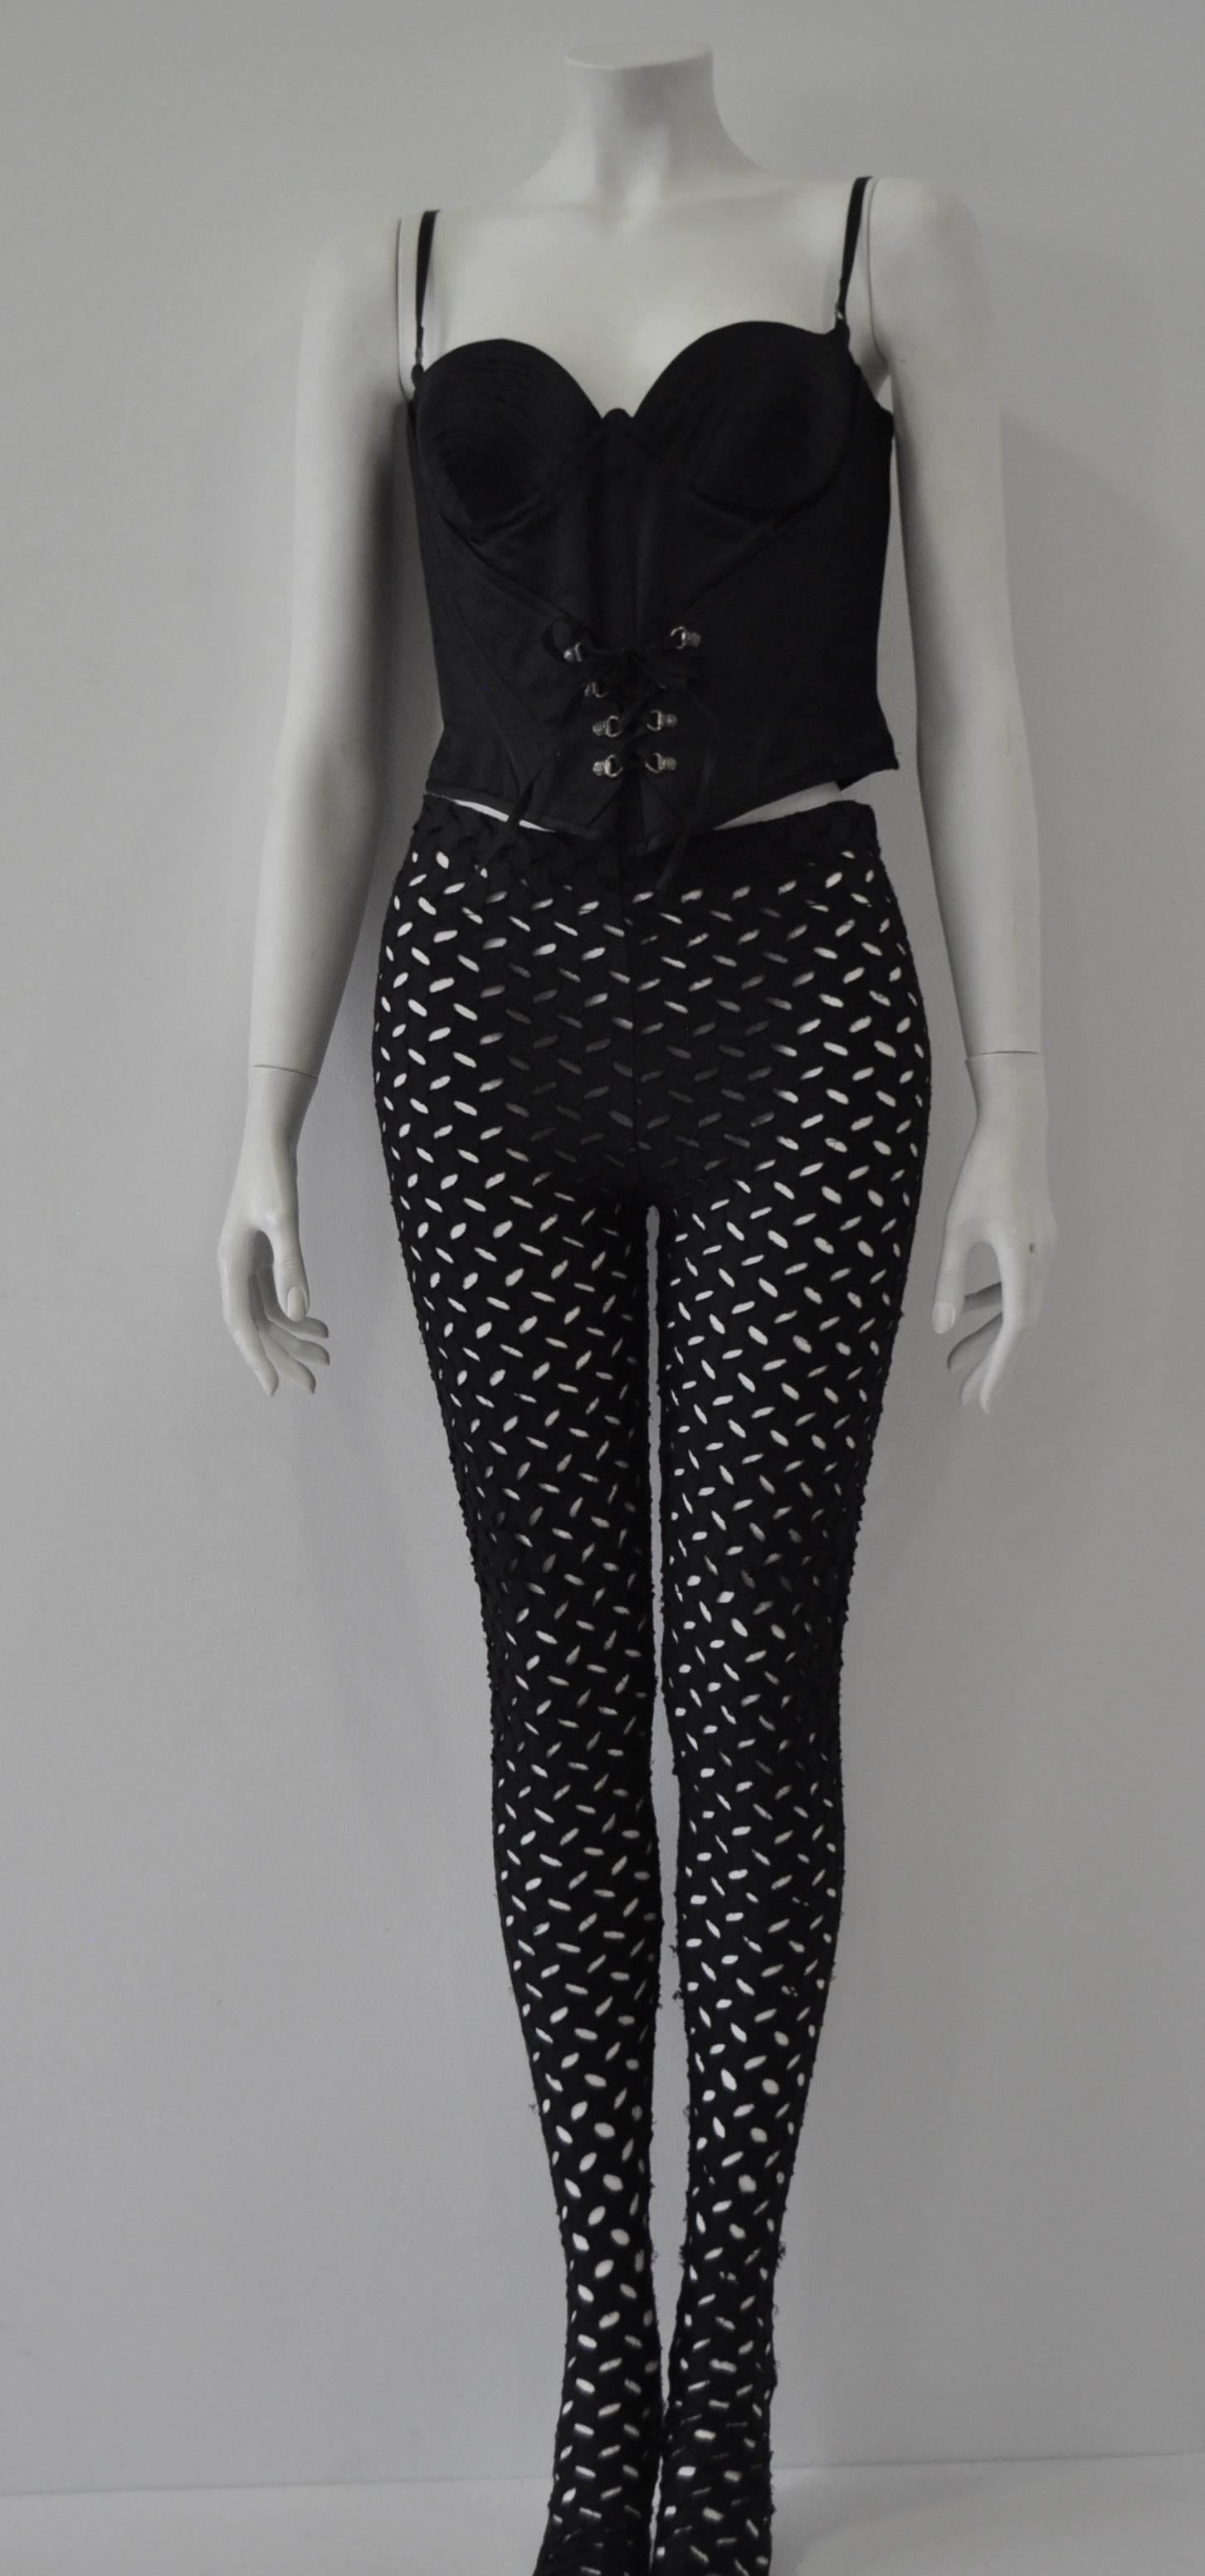 Iconic Gianni Versace Couture Punk Cut-Out Leggings For Sale 1